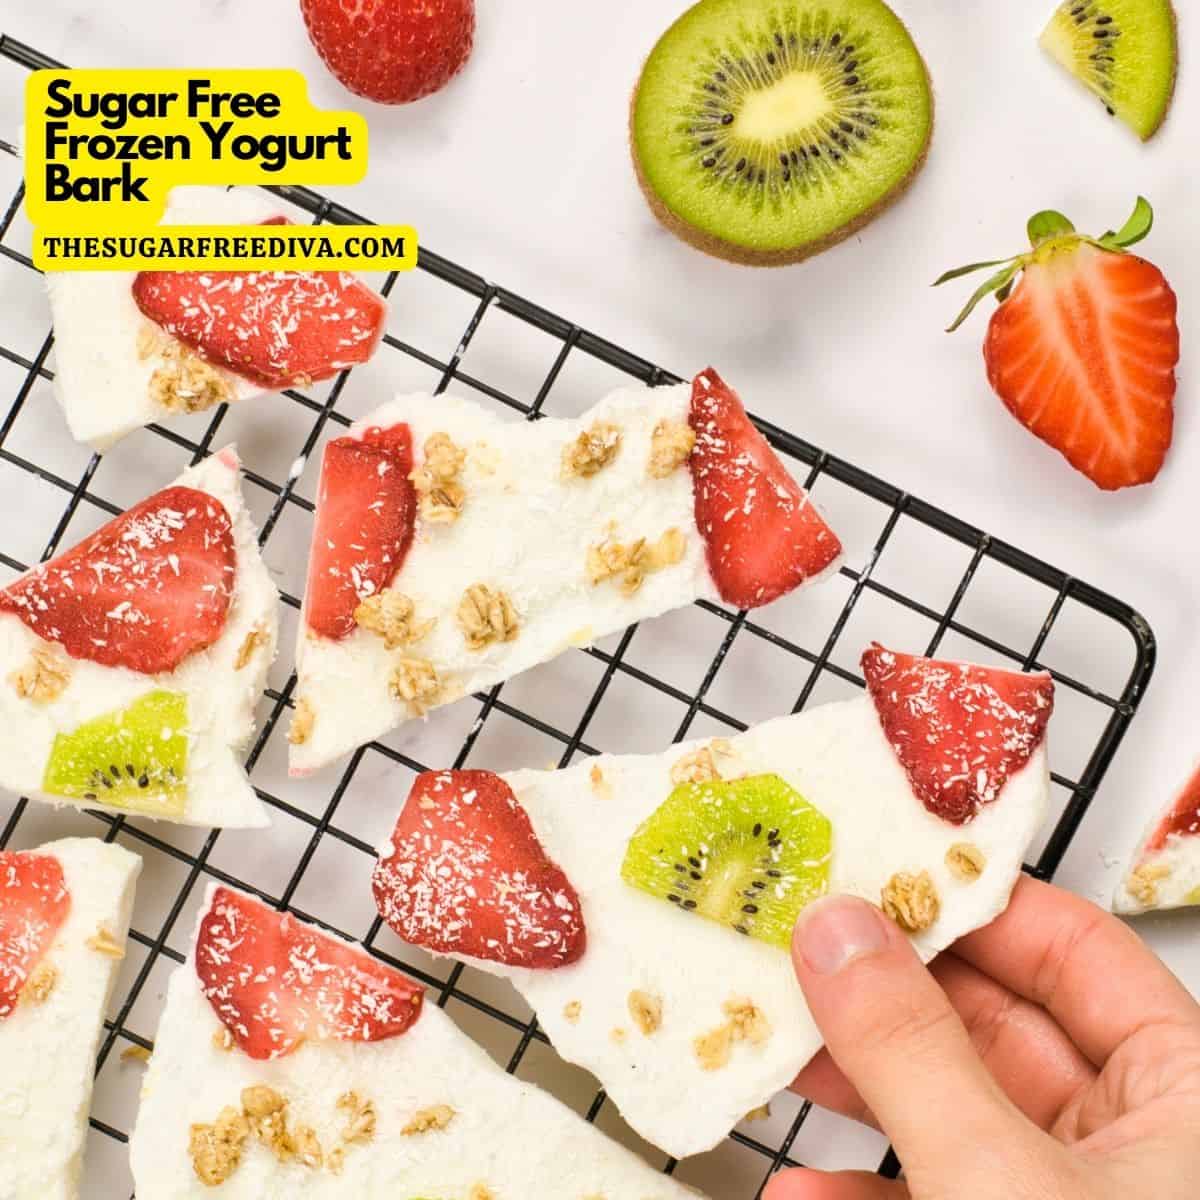 Sugar Free Frozen Yogurt Bark, a simple and delicious healthy snack made with healthy ingredients including yogurt and fresh fruit.